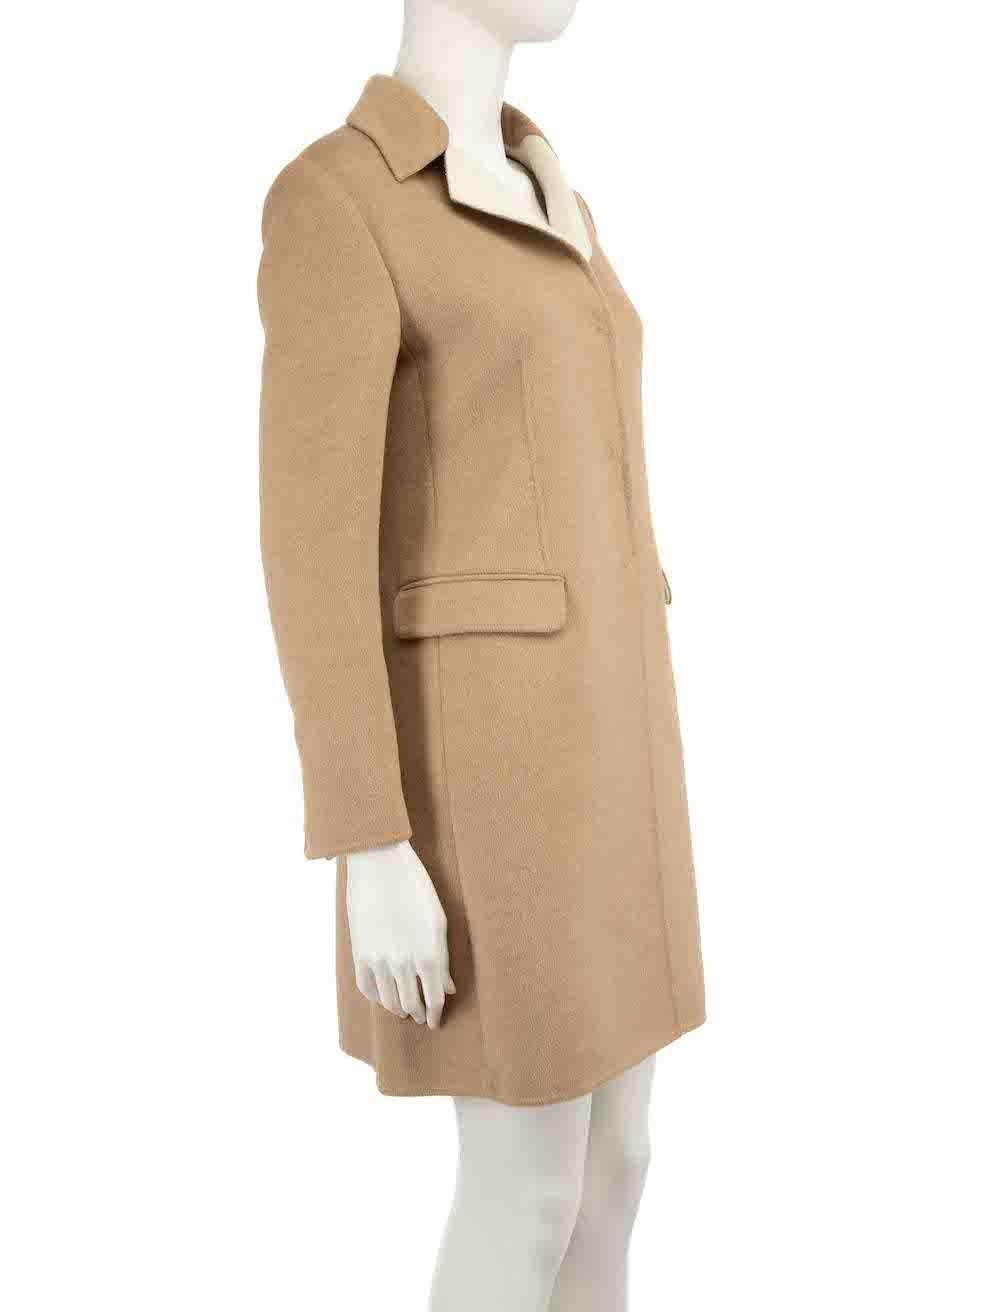 CONDITION is Very good. Hardly any visible wear to coat is evident on this used Prada designer resale item.
 
 
 
 Details
 
 
 Camel
 
 Brushed wool
 
 Coat
 
 Single breasted
 
 Snap button fastening
 
 Buttoned cuffs
 
 2x Front pockets
 
 
 
 
